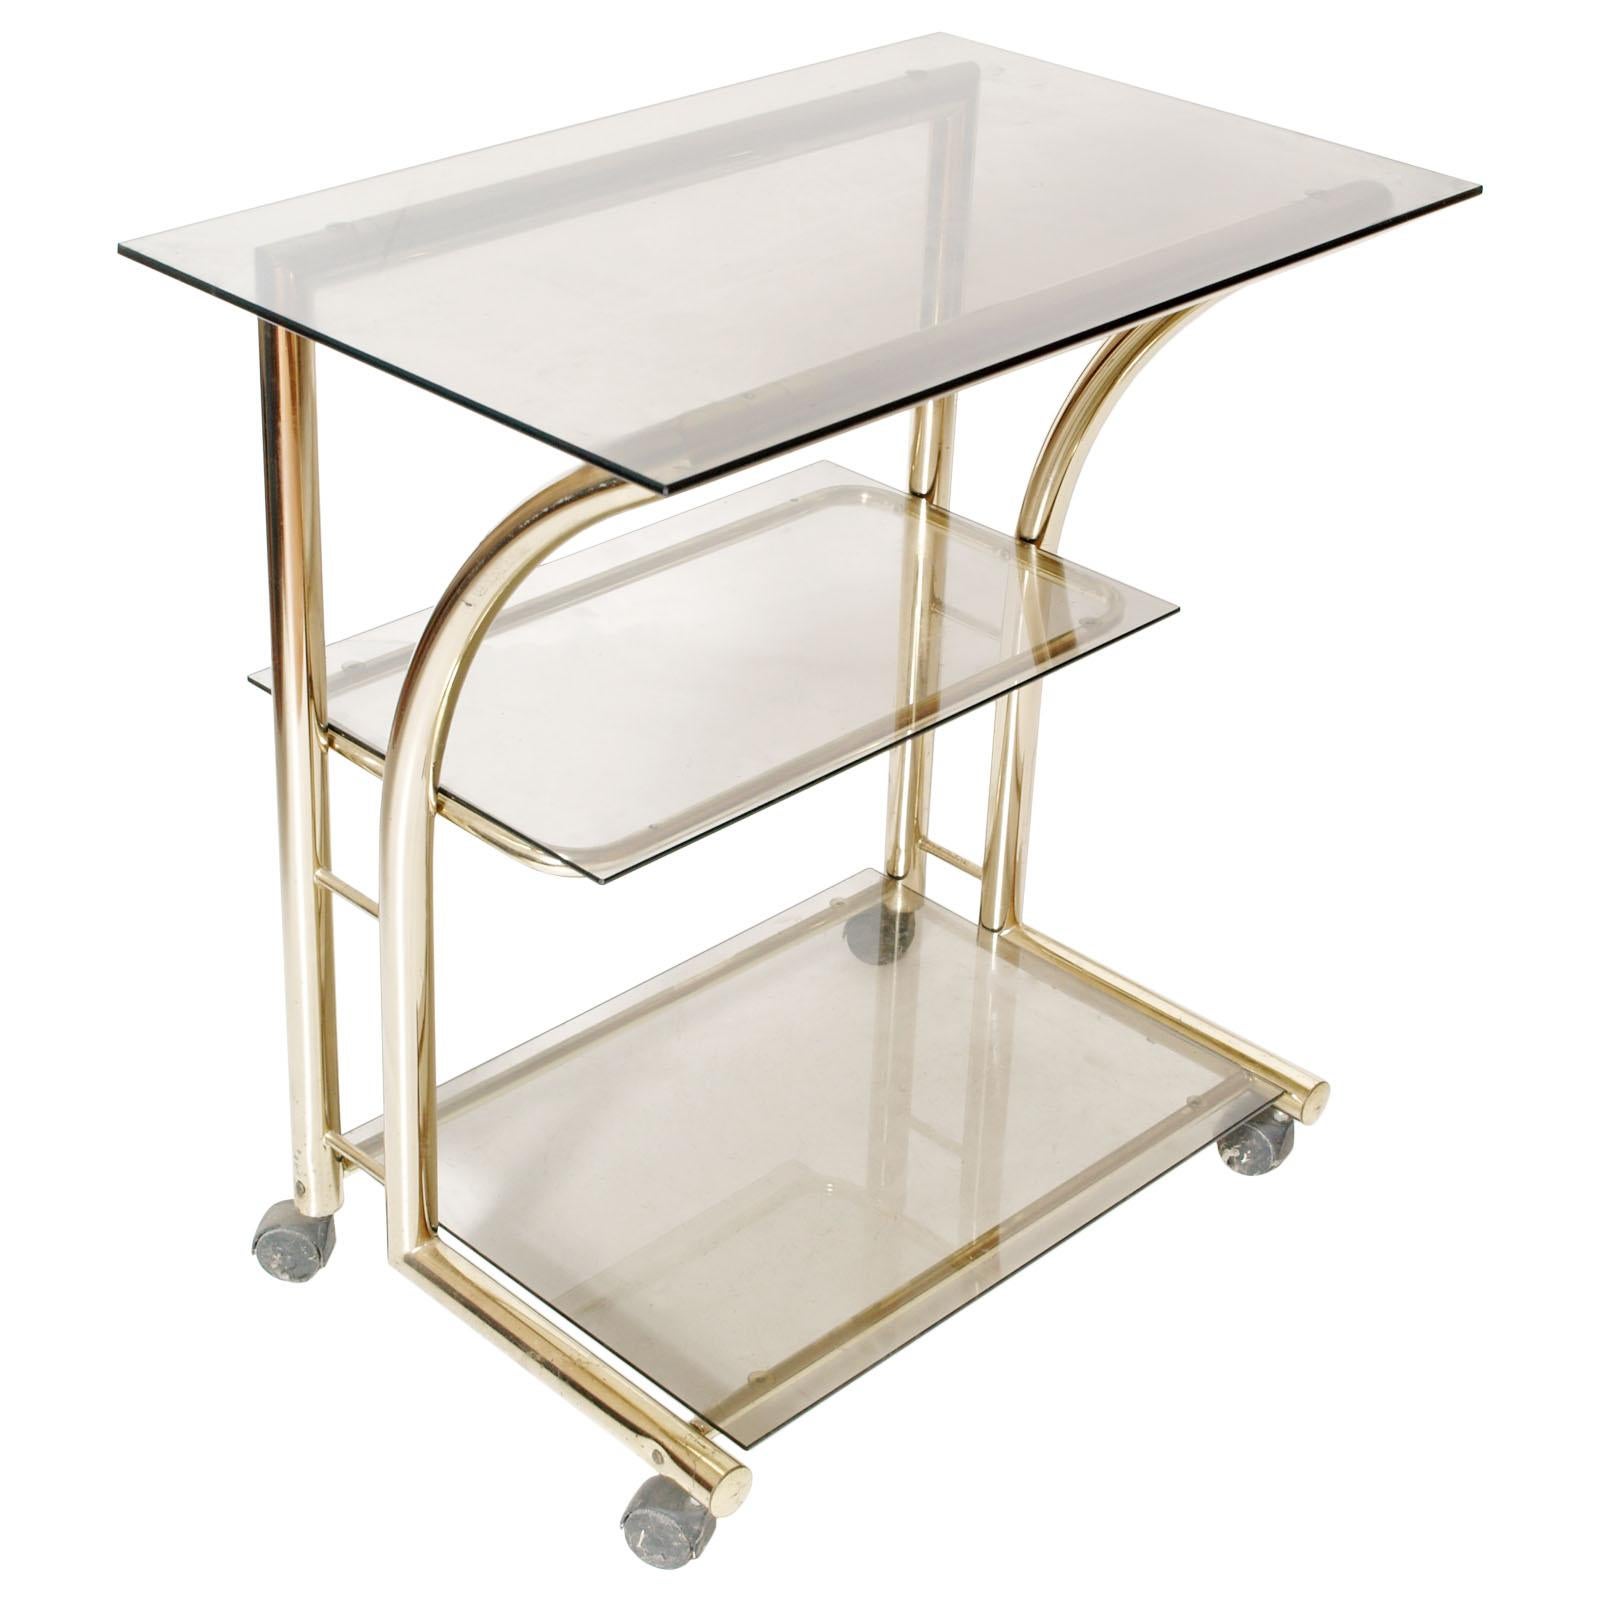 1970s Bar Cart, Occasional Table, Console, in Gilt Brass with 3 Cristal Shelves For Sale